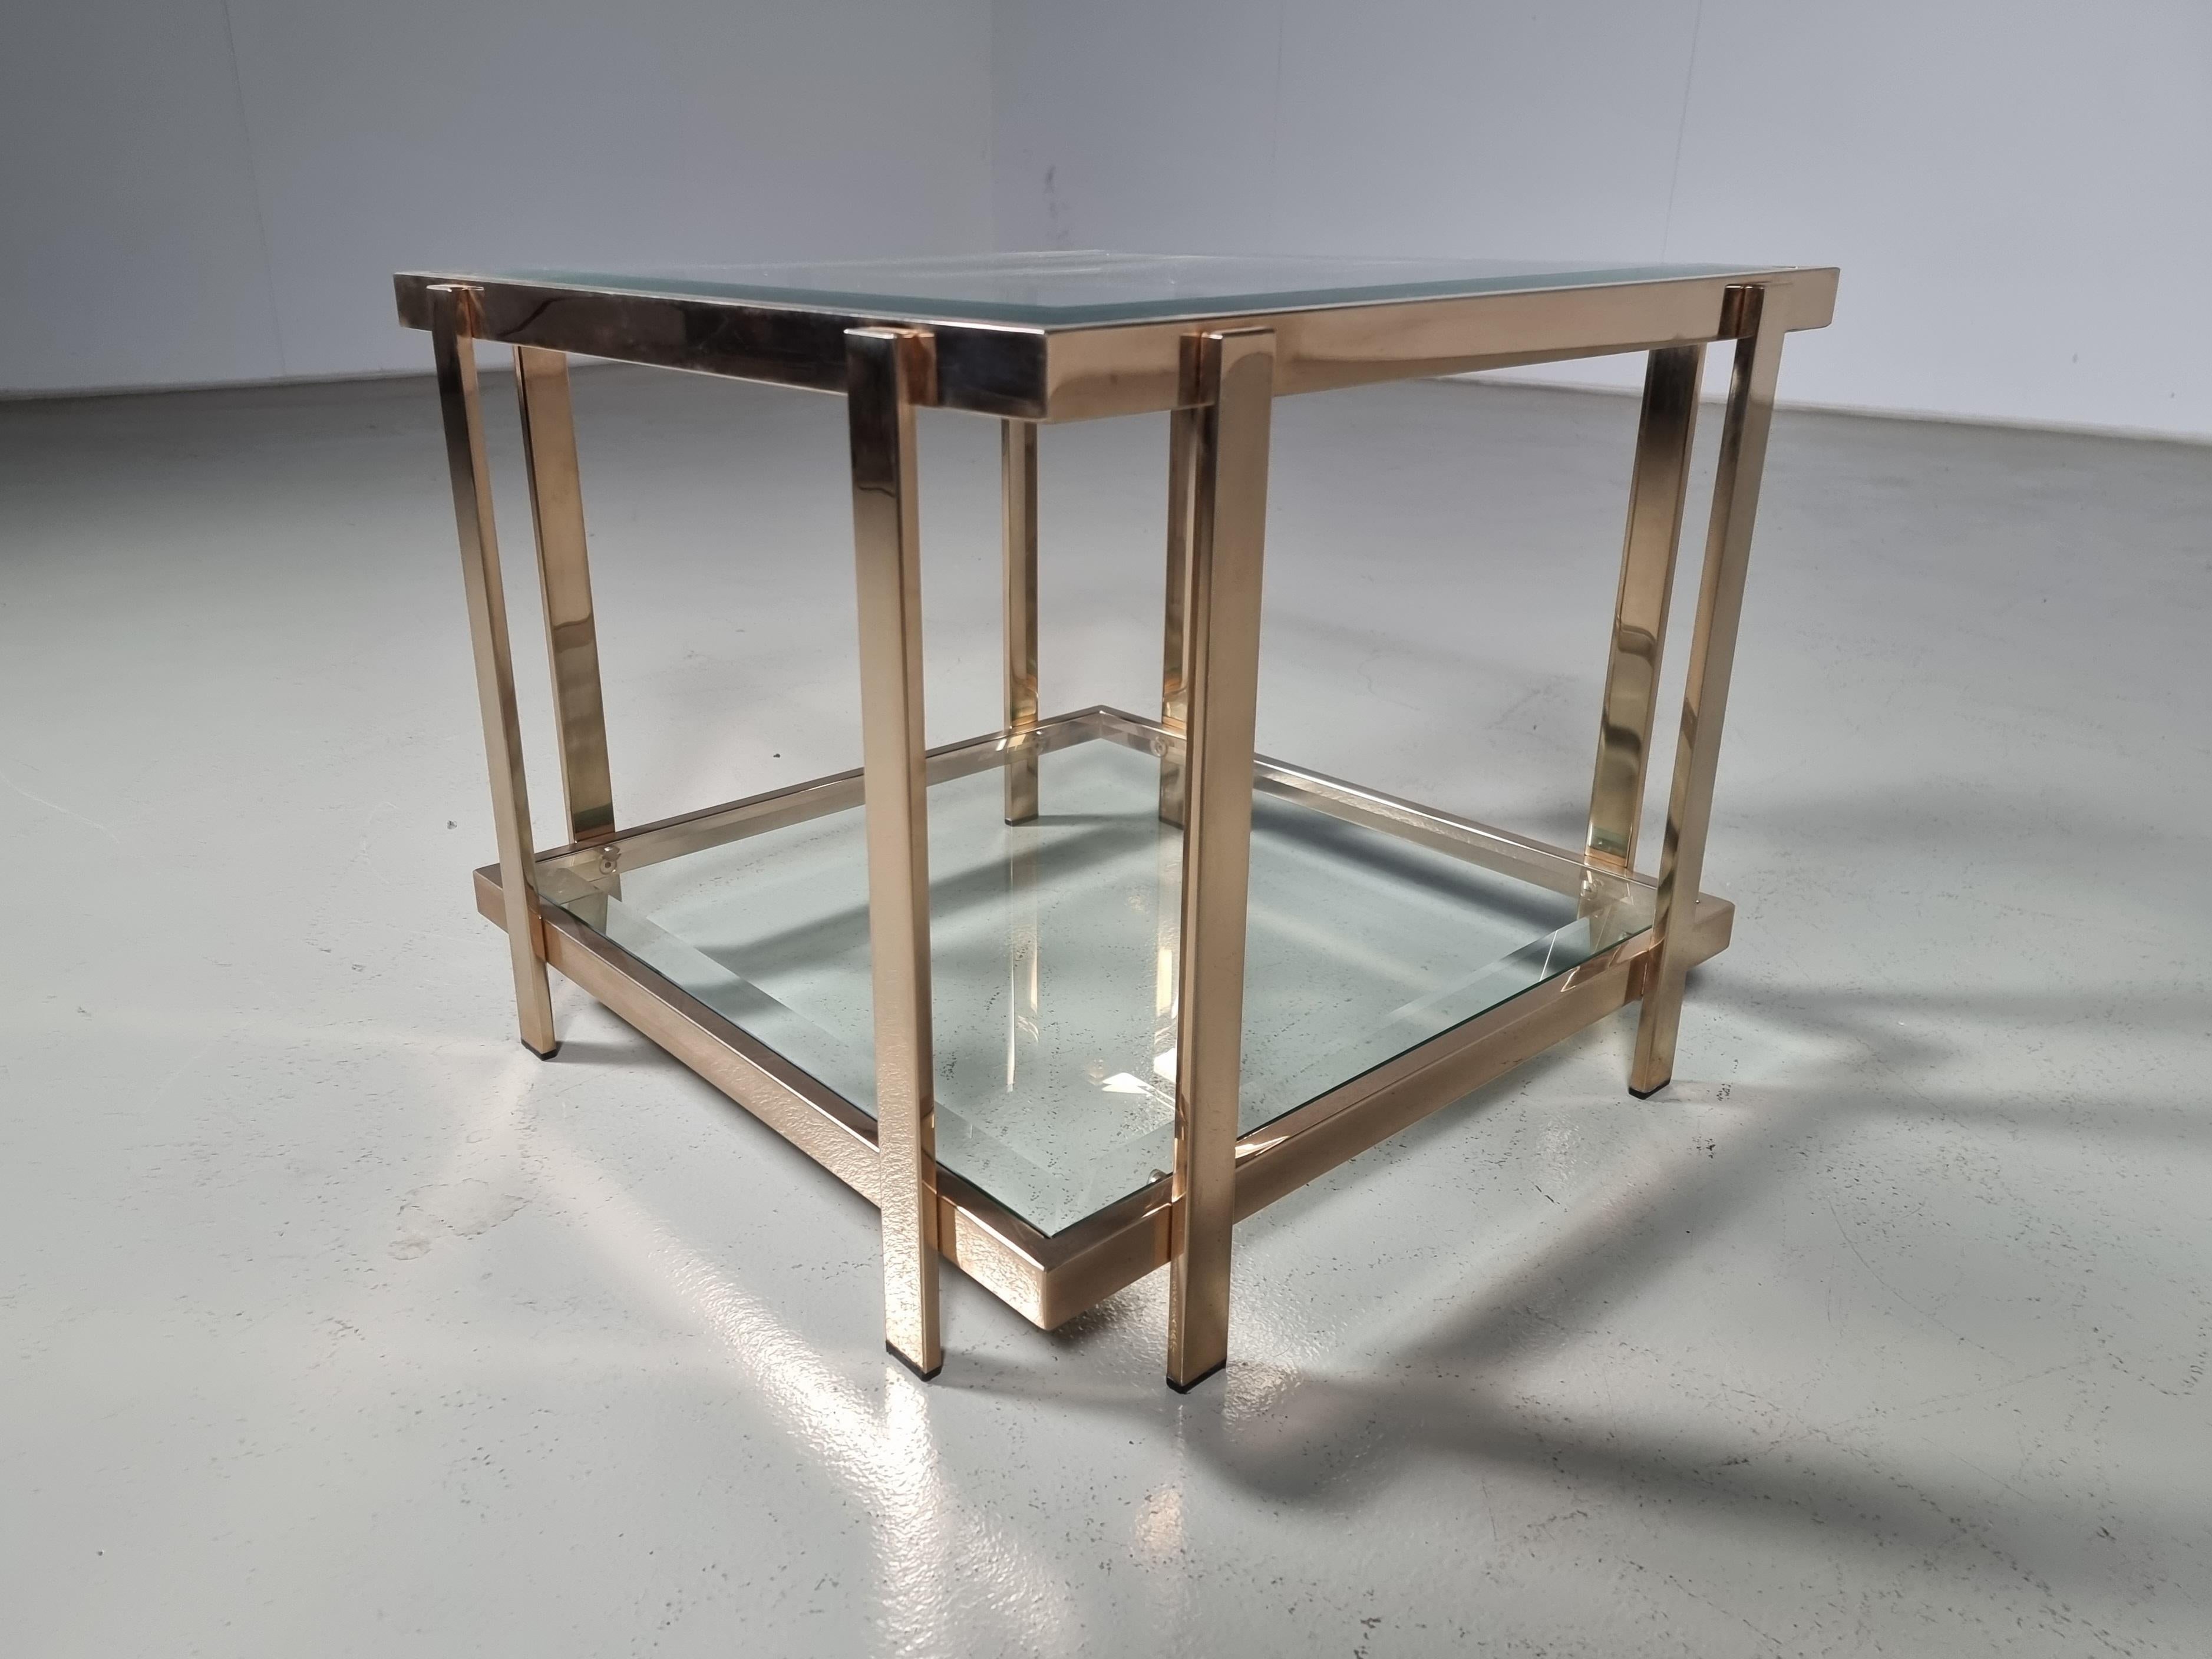 This beautiful side table was made in the early 1980s by Belgian Belgo Chrome.
The table has a metal frame that is gold plated with a thin layer of 23-carat gold. 

The table features two faceted glass plates, The legs are equipped with plastic